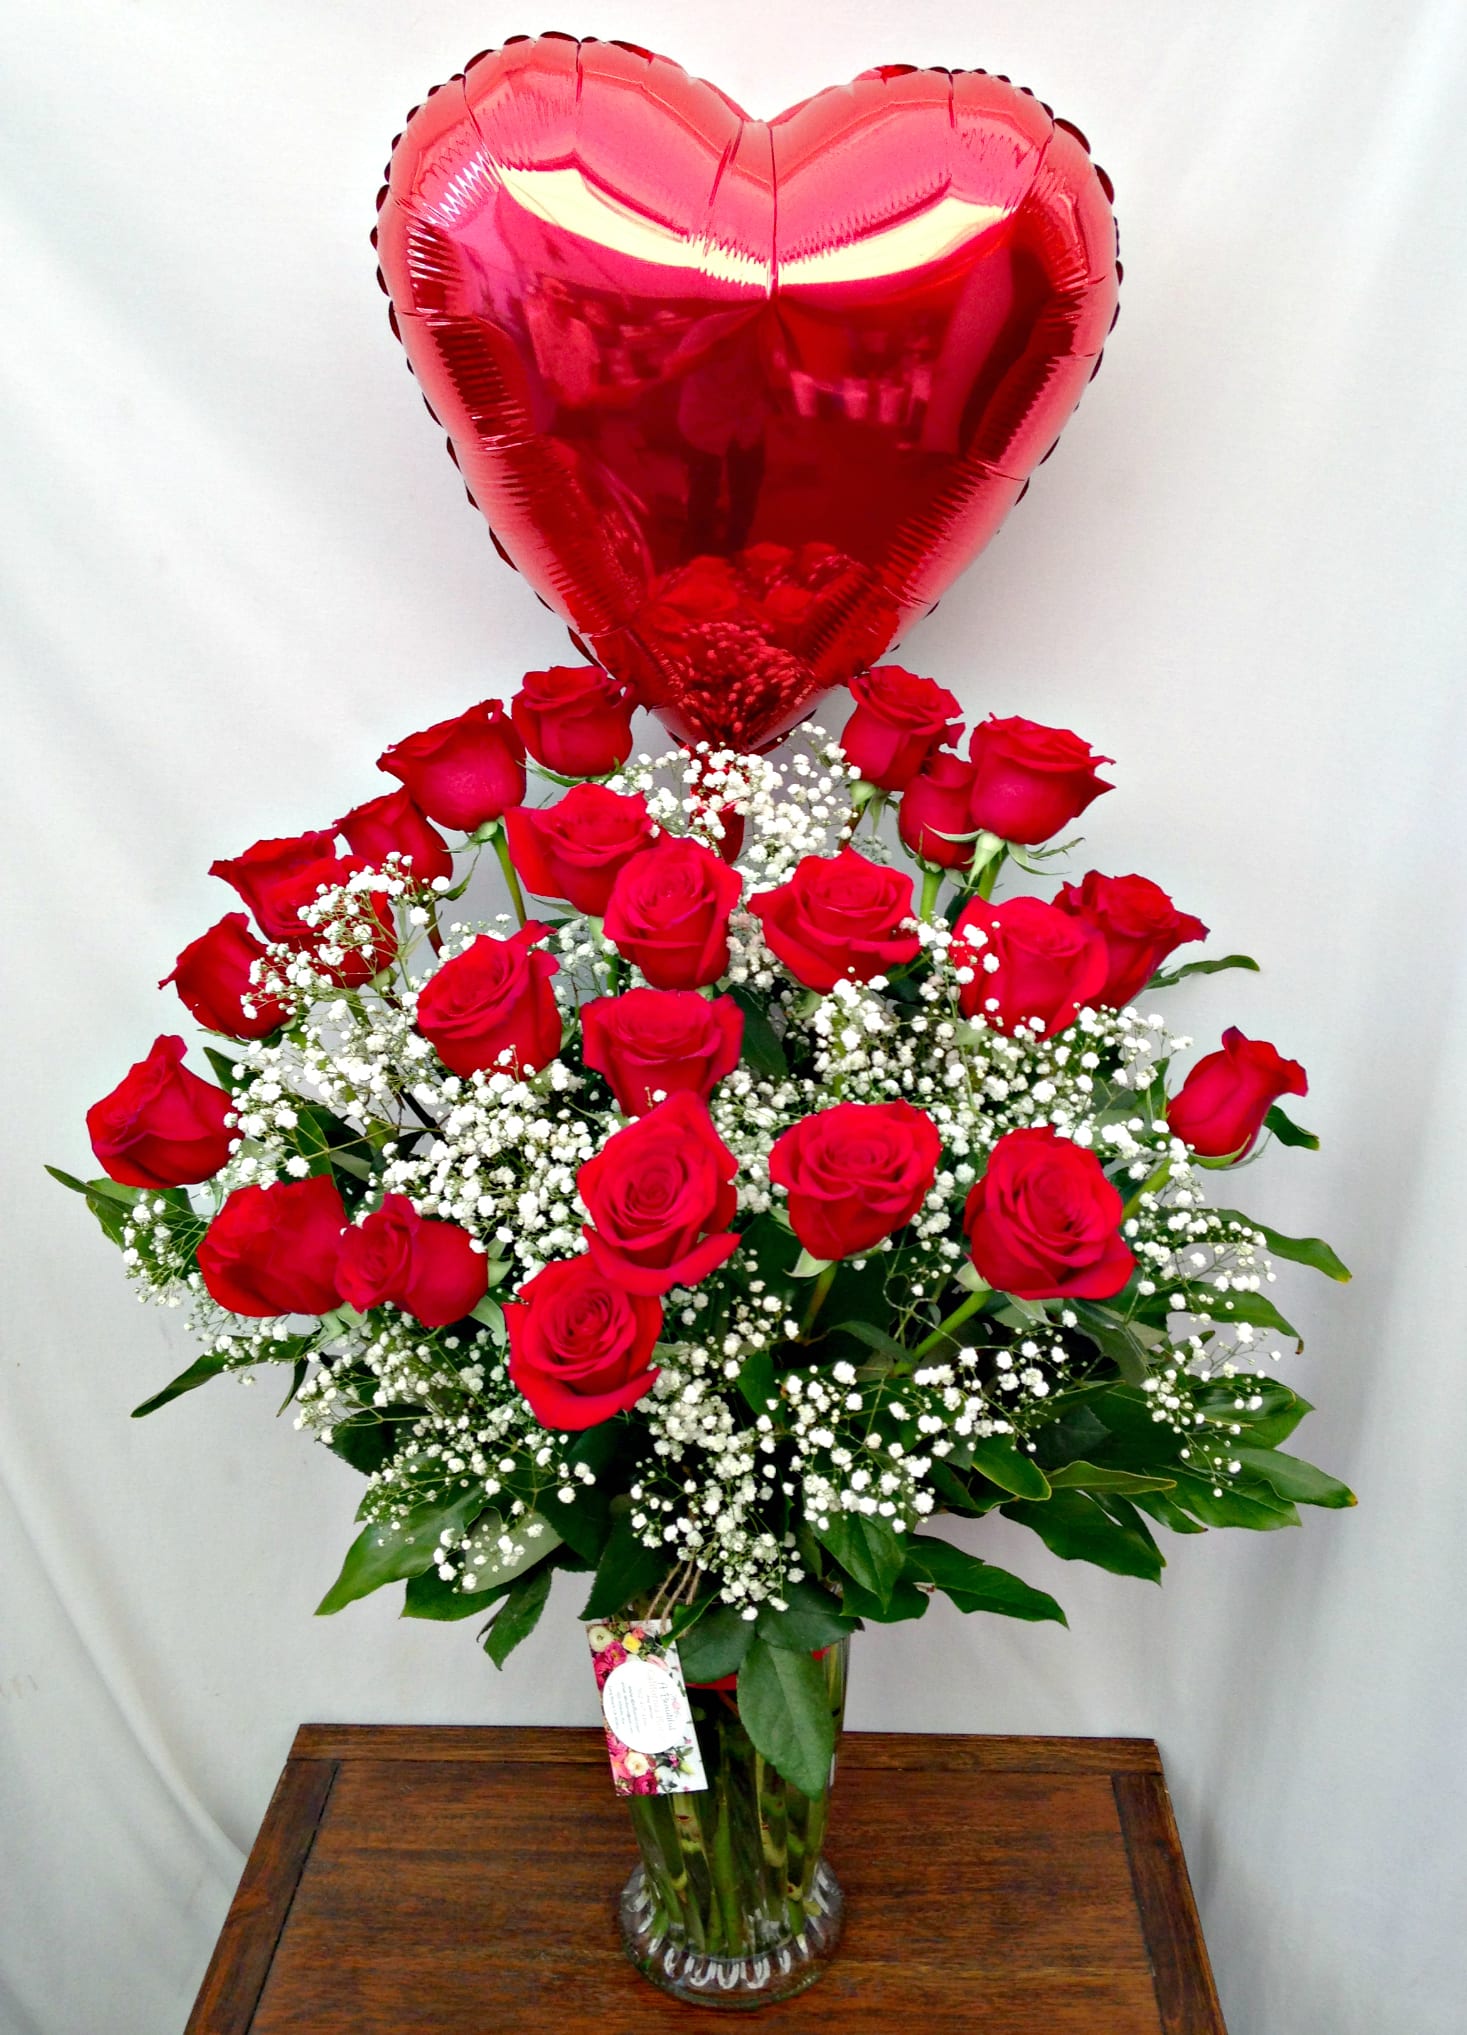 charter Mountaineer matron Two Dozen Premium RED Roses with lush accents with RED Heart Balloon,  SPECTACULAR! by A Beautiful California Florist